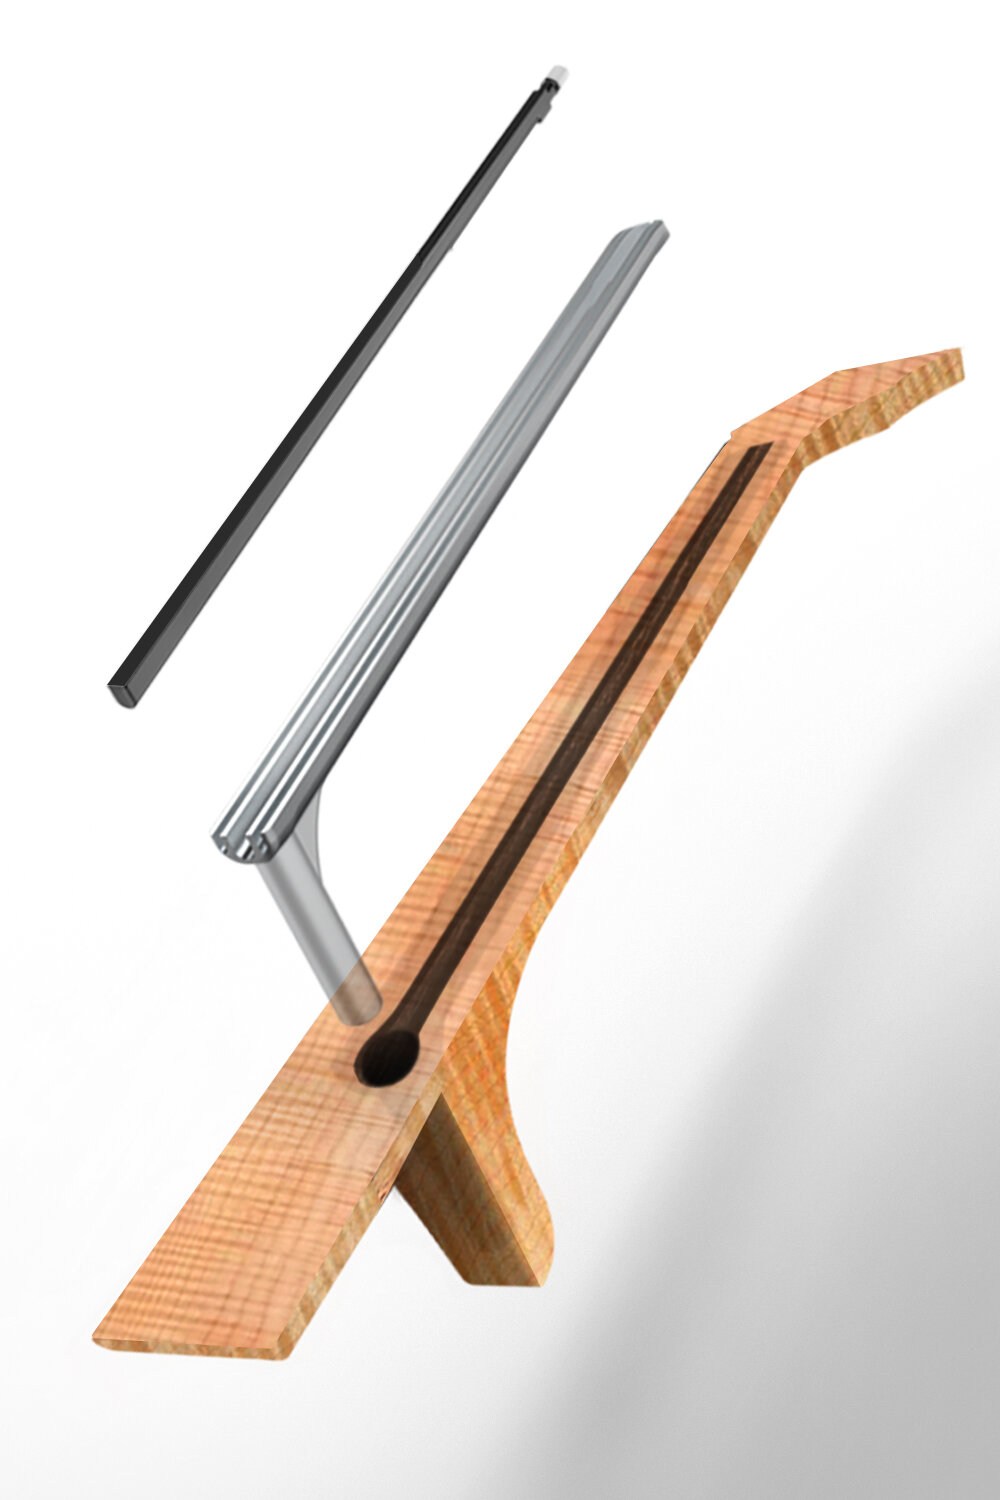 Aluminum core reinforced flame maple neck - Aluminum alloy added as reinforced structure to the neck with excellent conductivity and high strength.The bending strength of Enya neck is double compared to ordinary mahogany neck.Sound transmission much better！